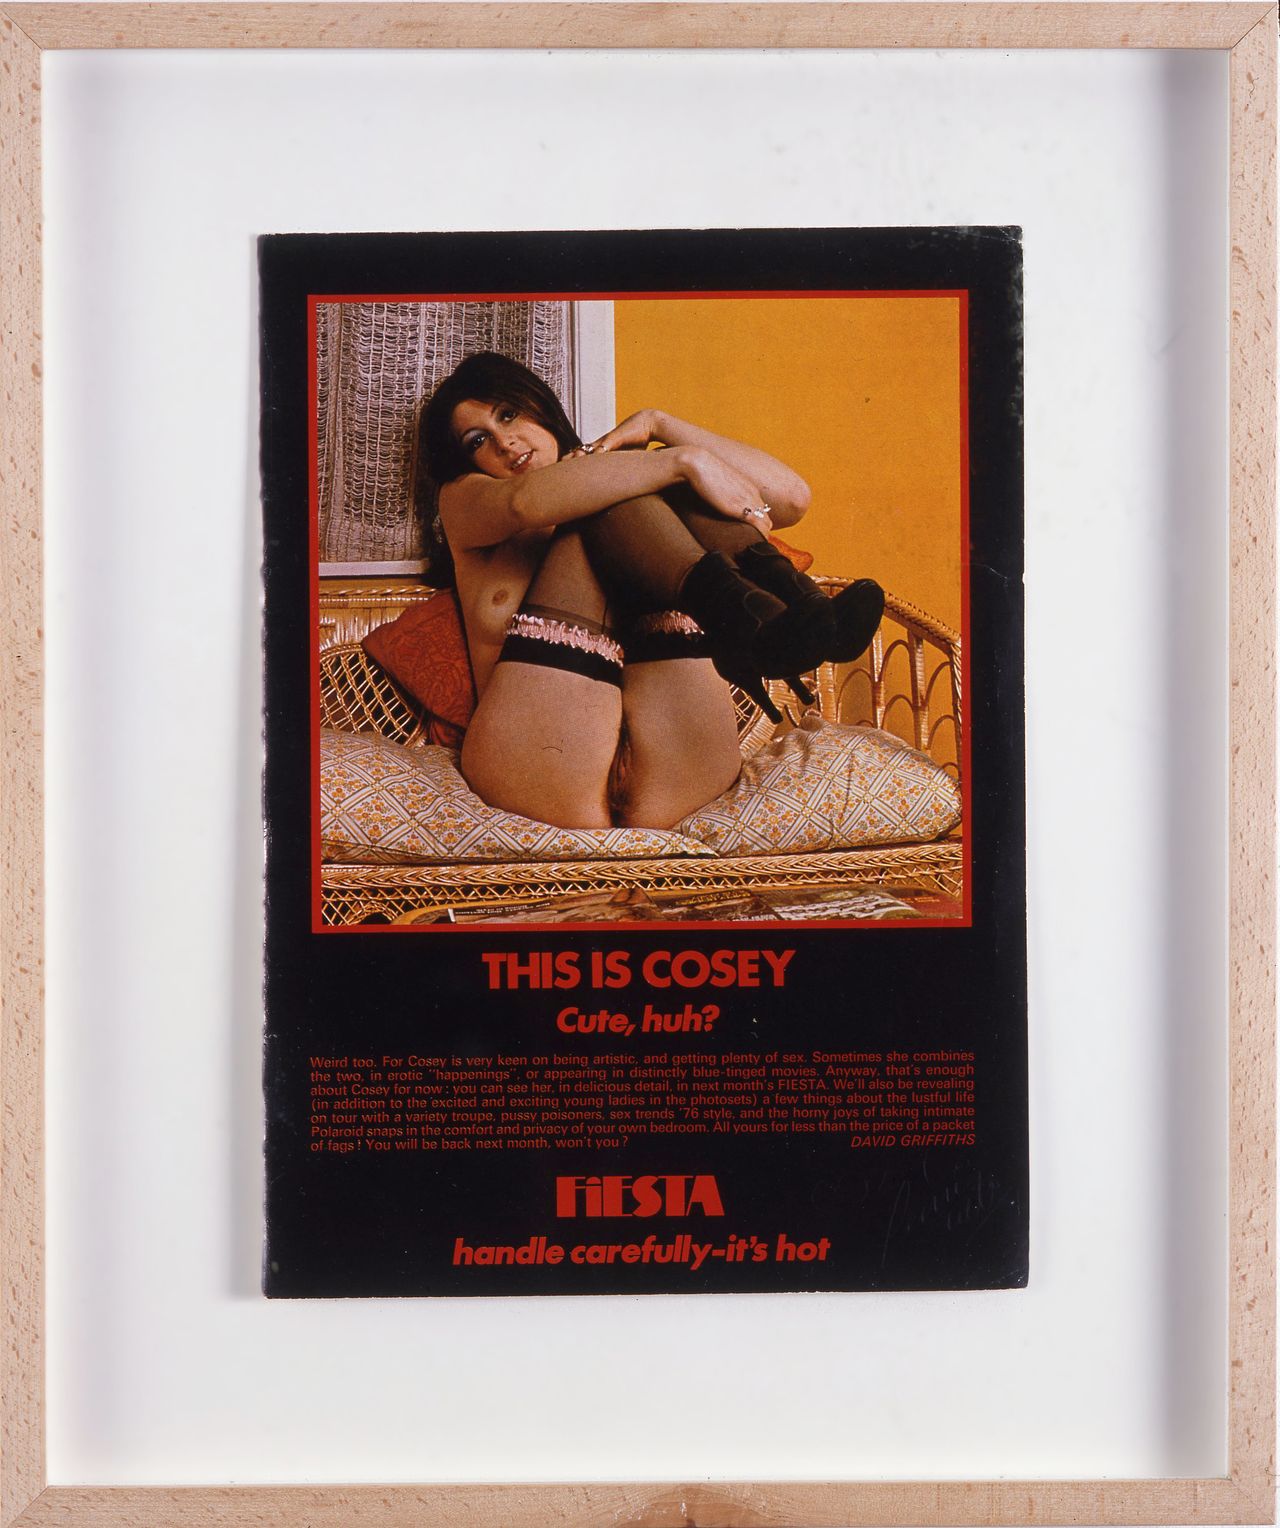 This is Cosey, Cute huh? 2010 Magazine Action Print on paper 30 x 38 cm (framed)